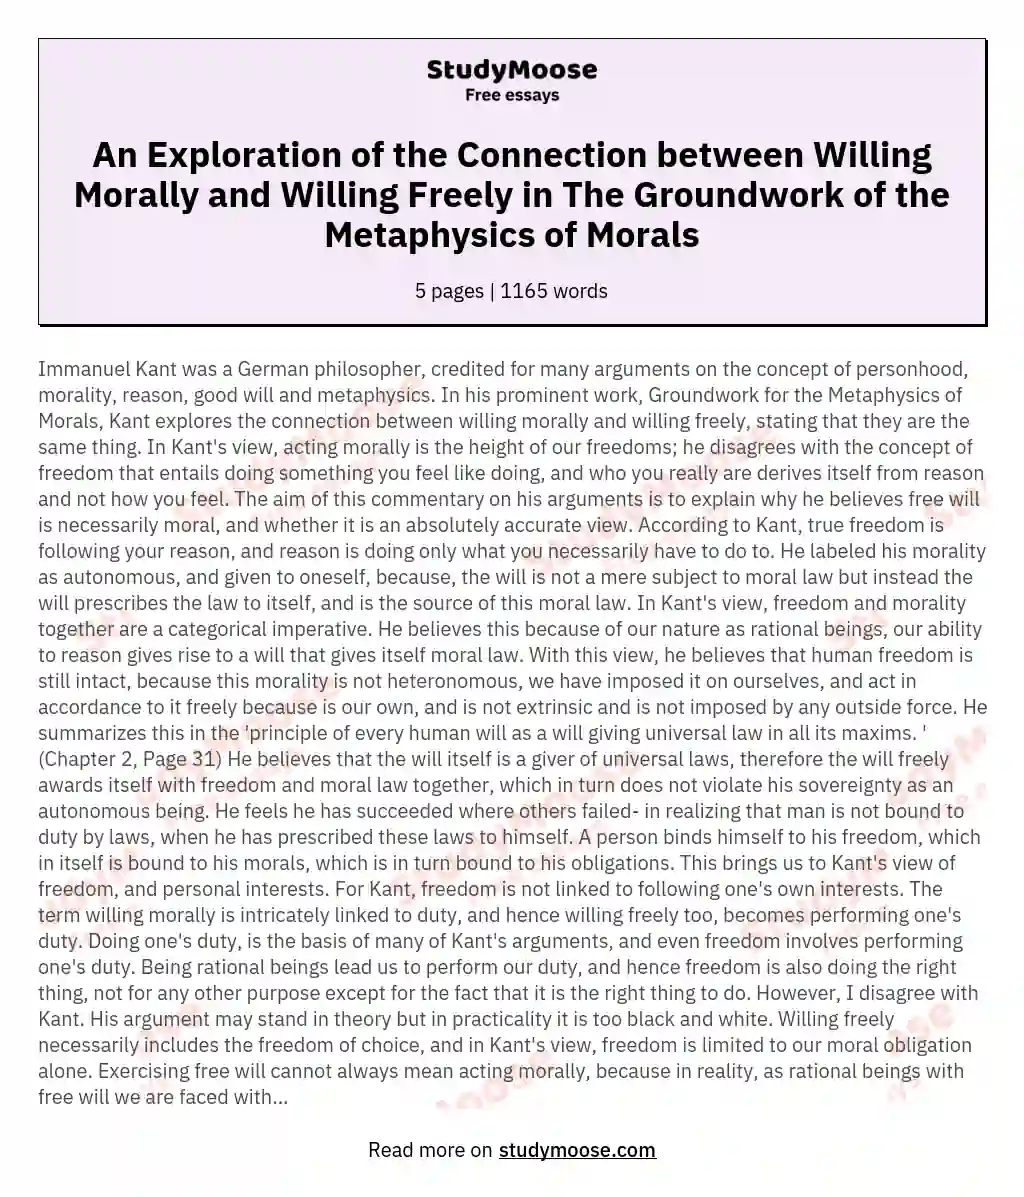 An Exploration of the Connection between Willing Morally and Willing Freely in The Groundwork of the Metaphysics of Morals essay